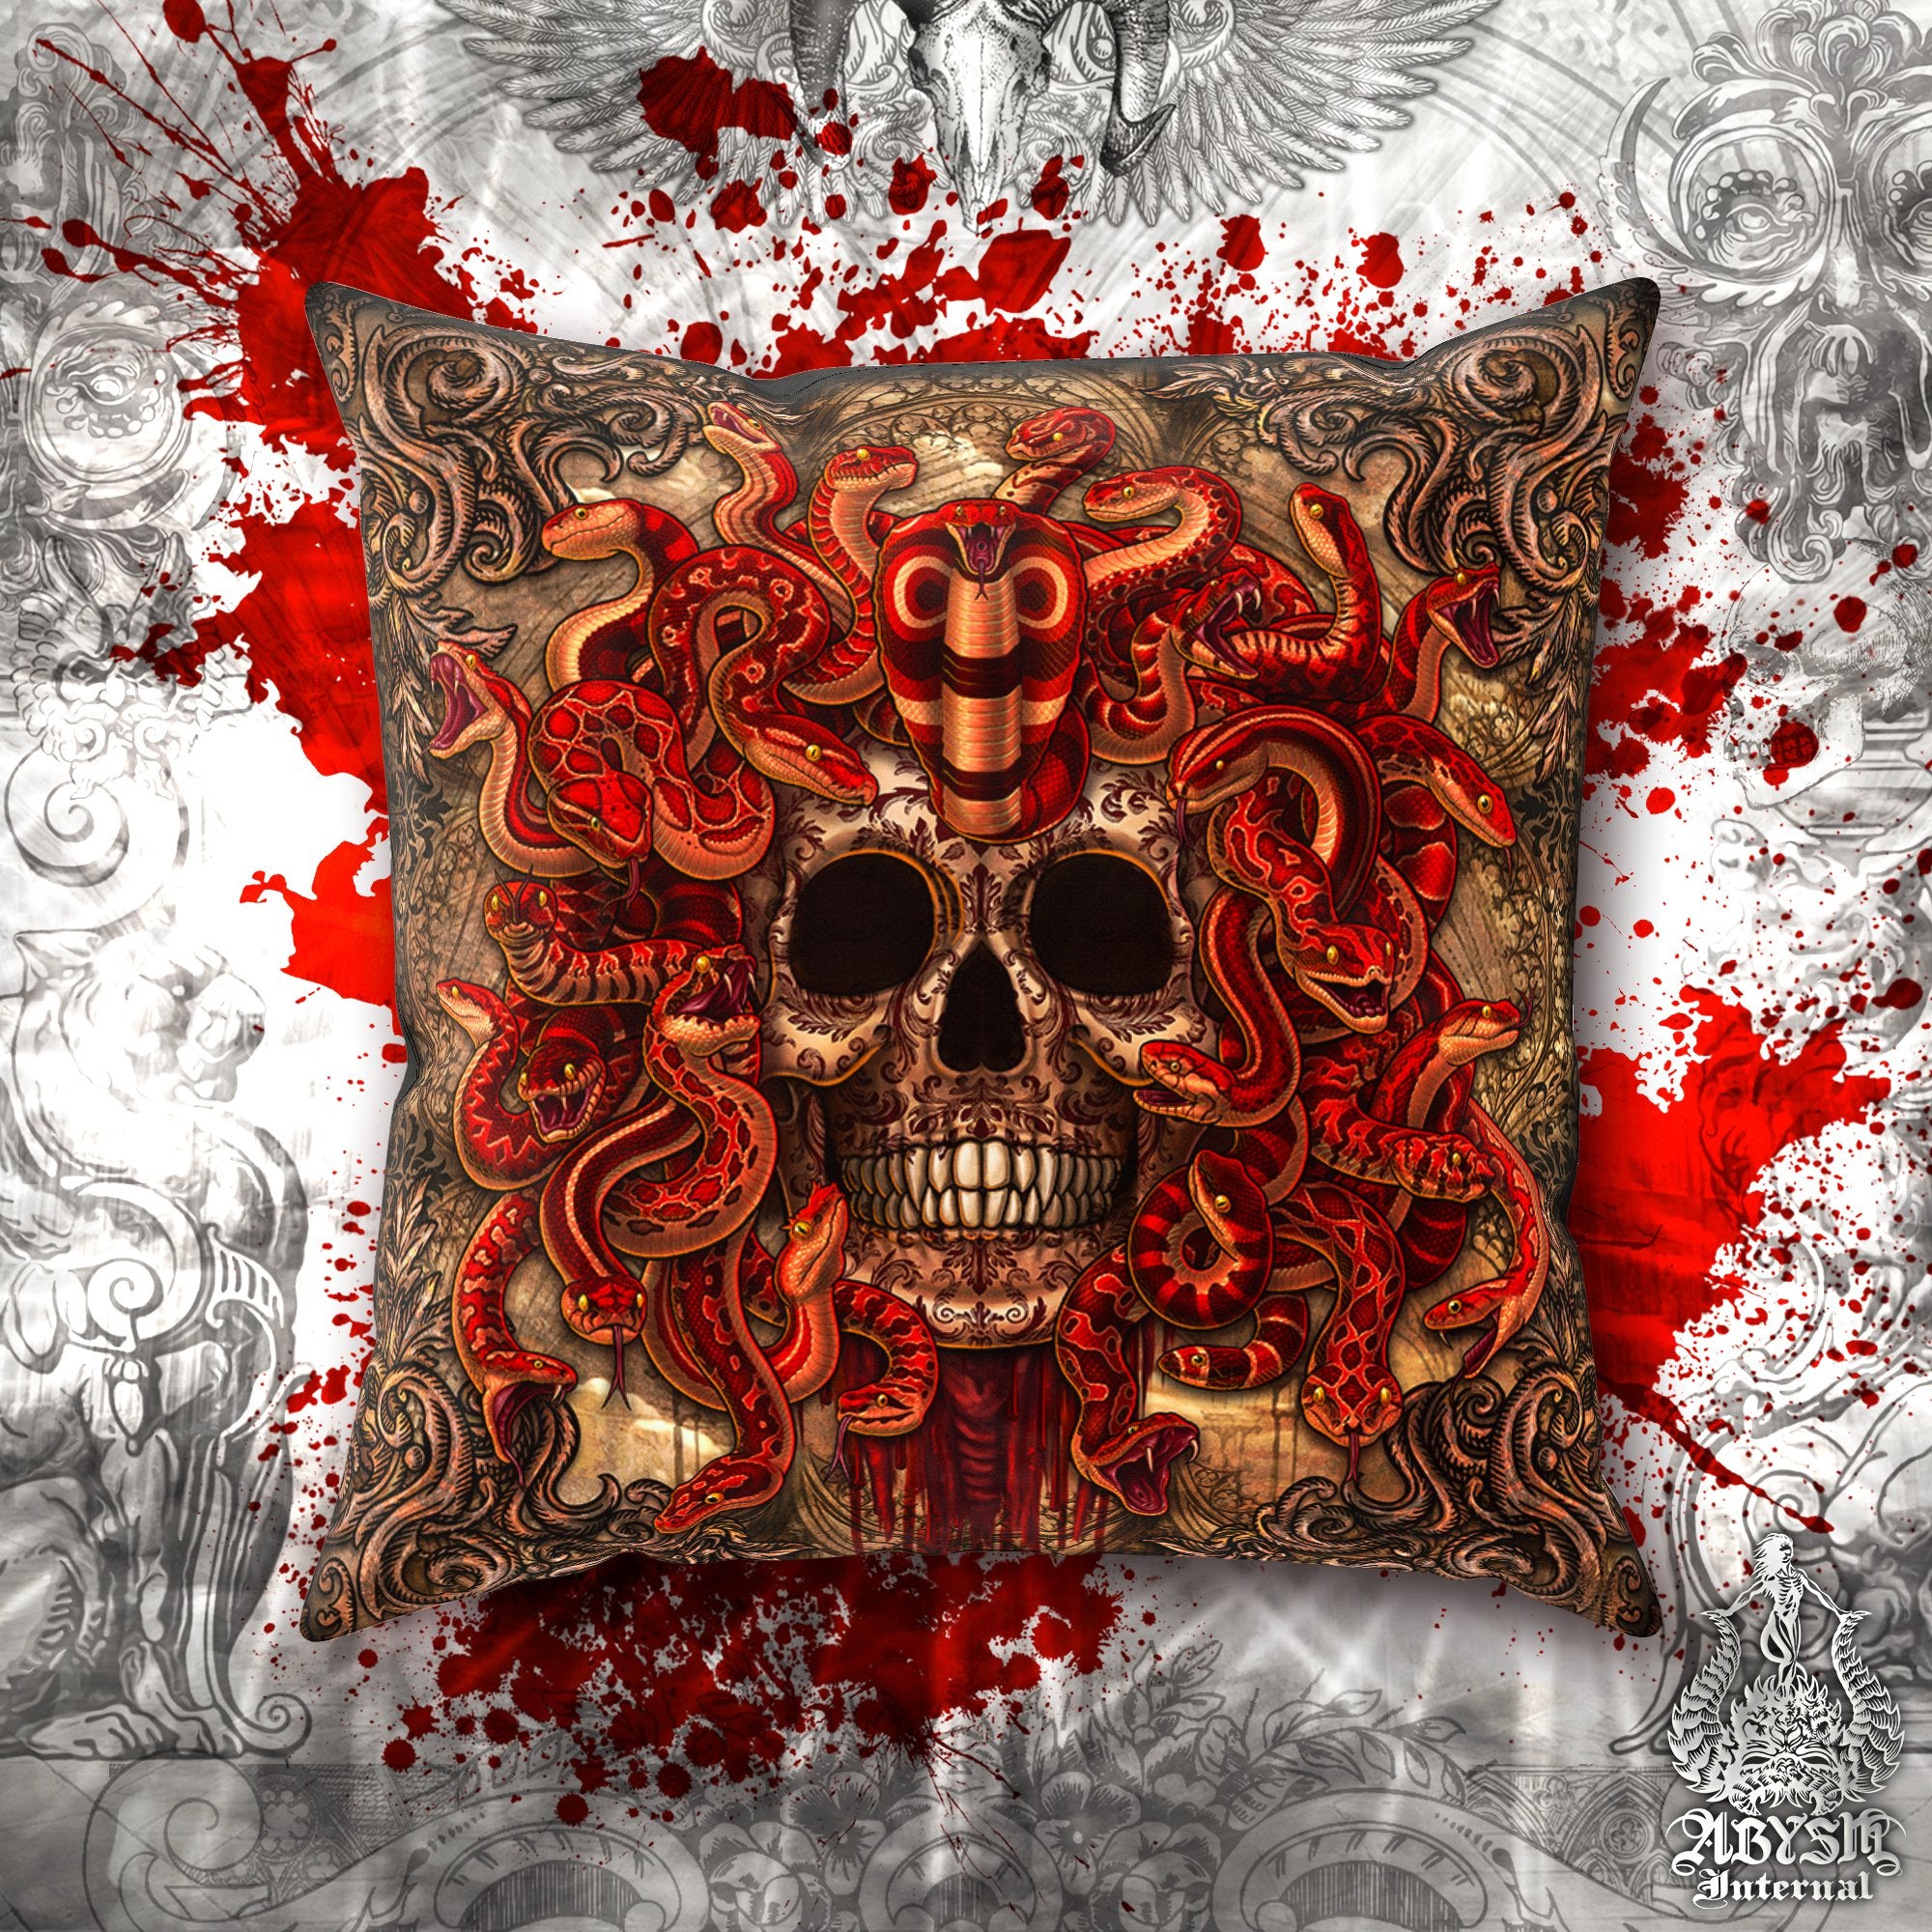 Gothic Throw Pillow, Decorative Accent Pillow, Square Cushion Cover, Goth Room Decor, Skull Horror Art, Alternative Home - Medusa, Beige Snakes, 4 Faces - Abysm Internal